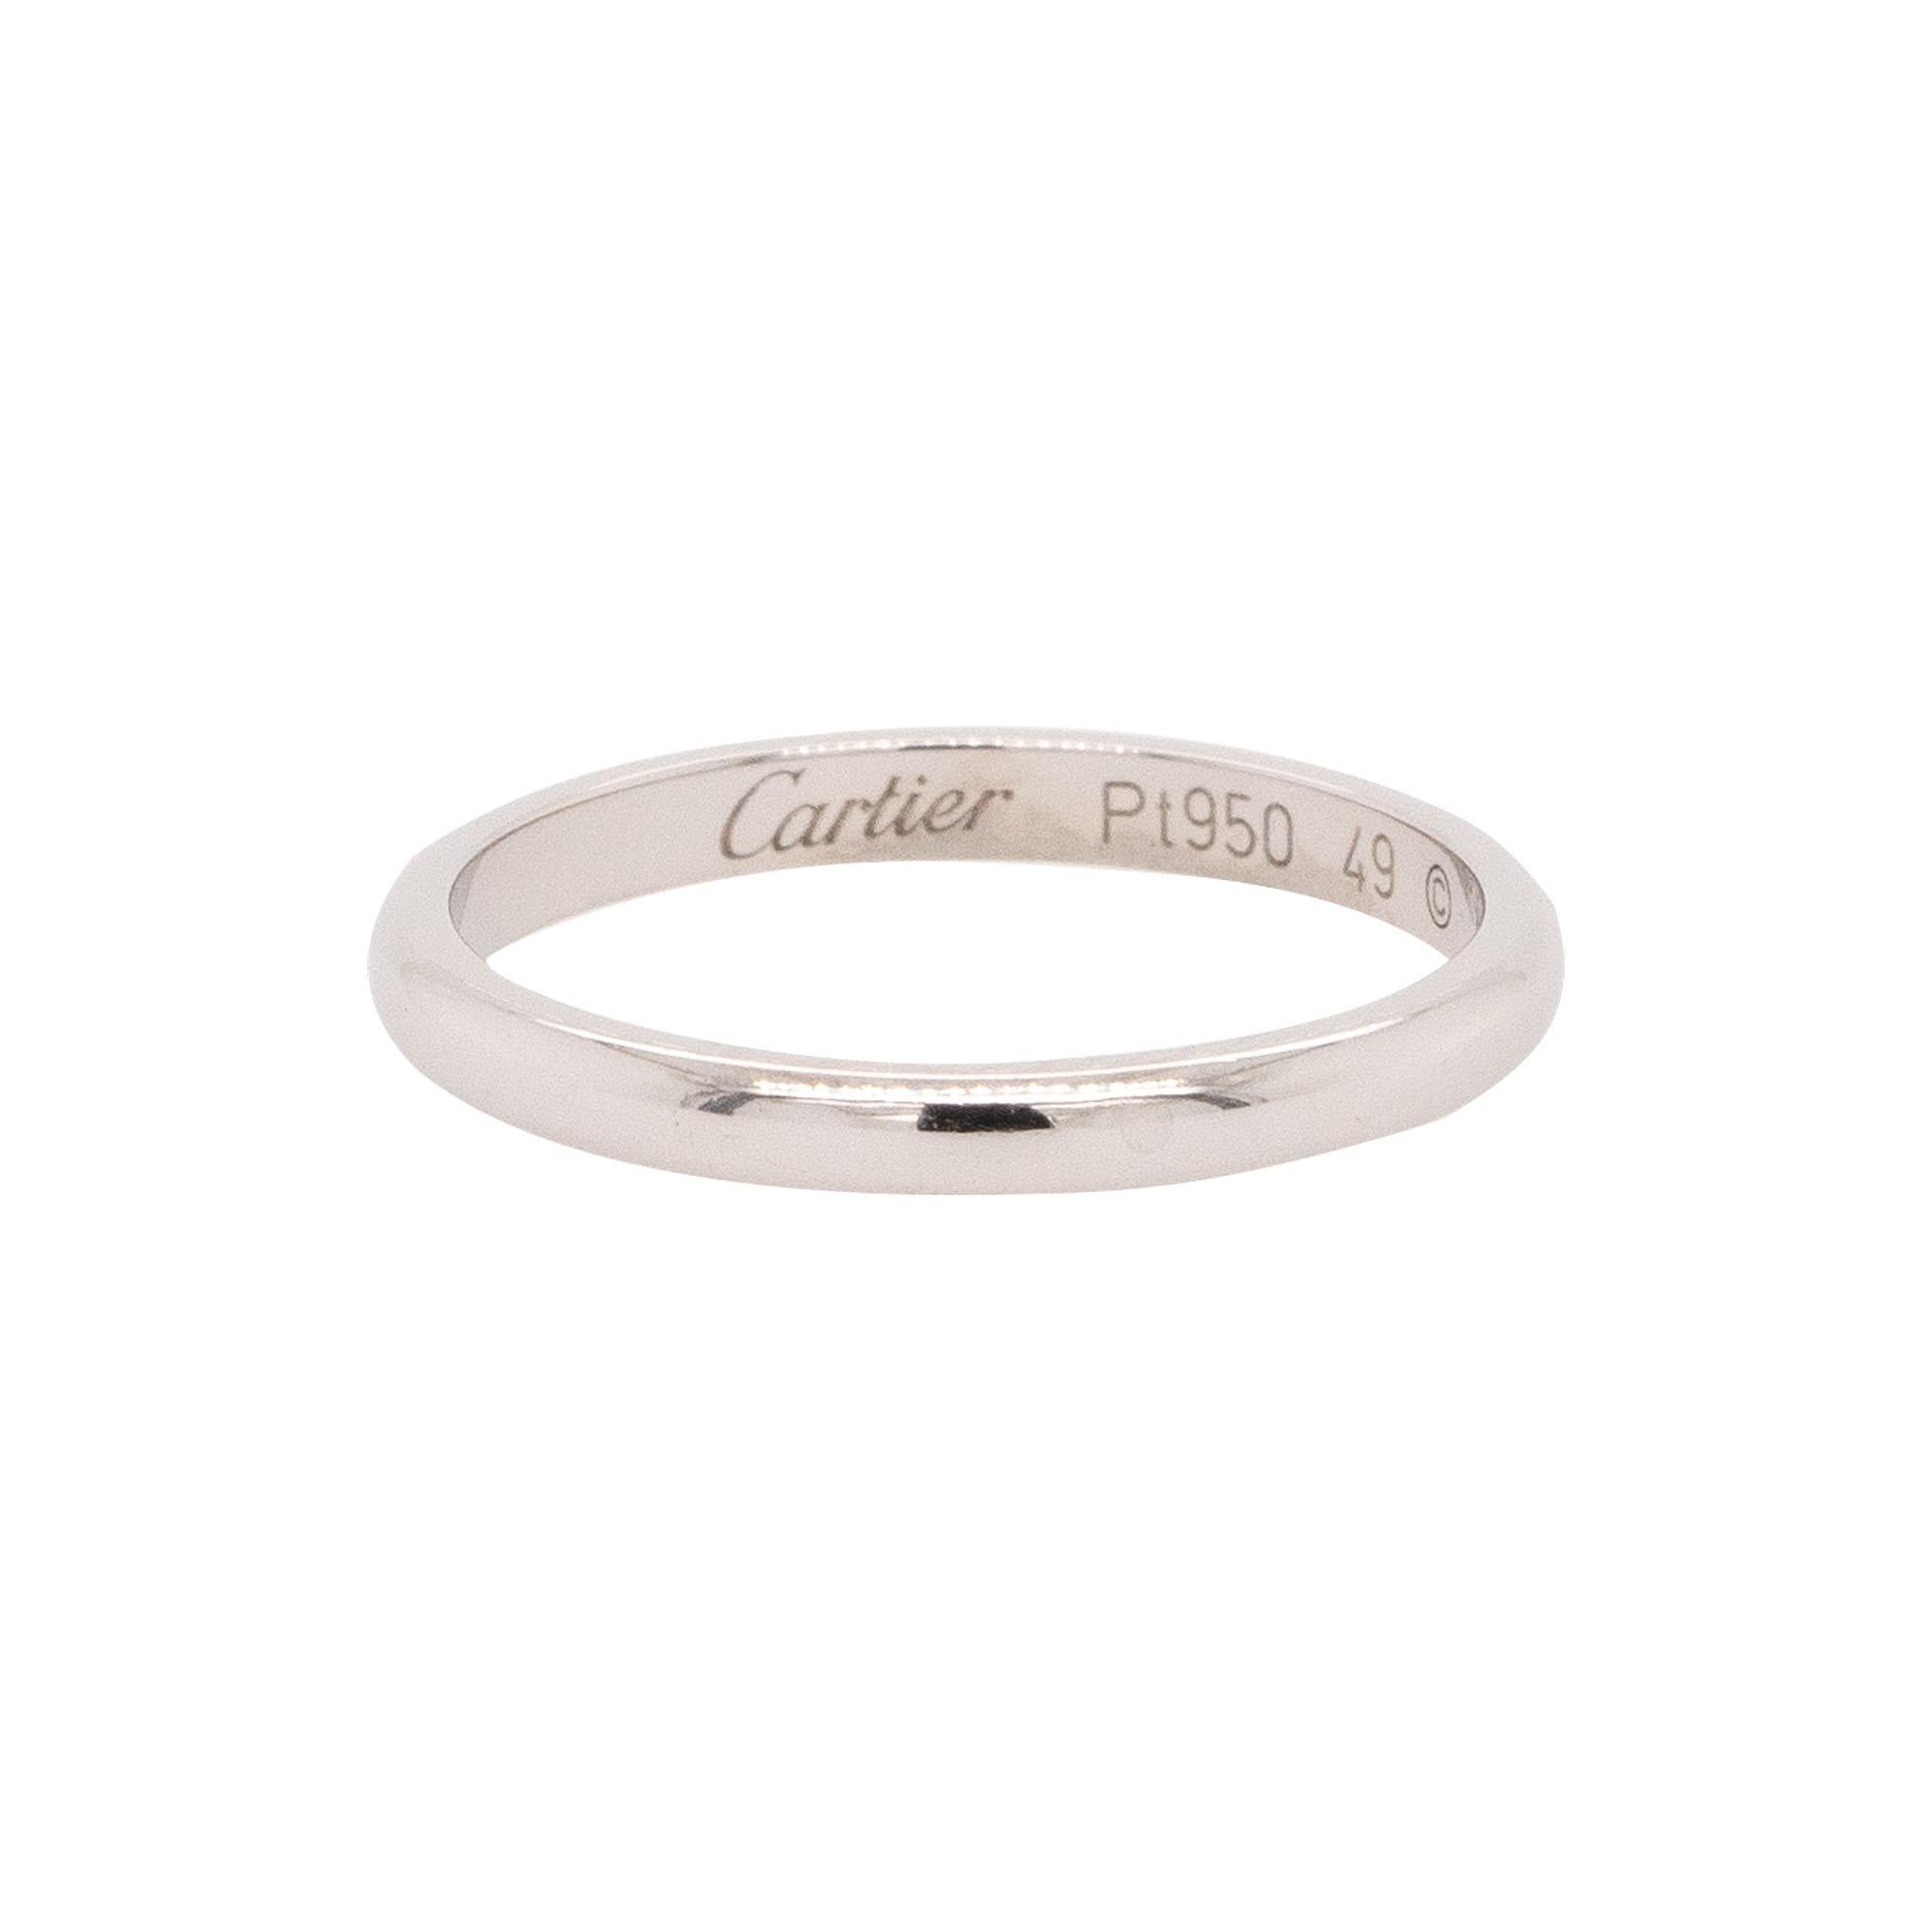 Designer: Cartier
Material: Platinum
Size: Cartier size 49
Total Weight: 2.4g (1.6dwt)
Measurements: 18mm x 2mm 18mm
Cartier: size 49
Additional Details: This item comes with original Cartier papers
SKU: R6126